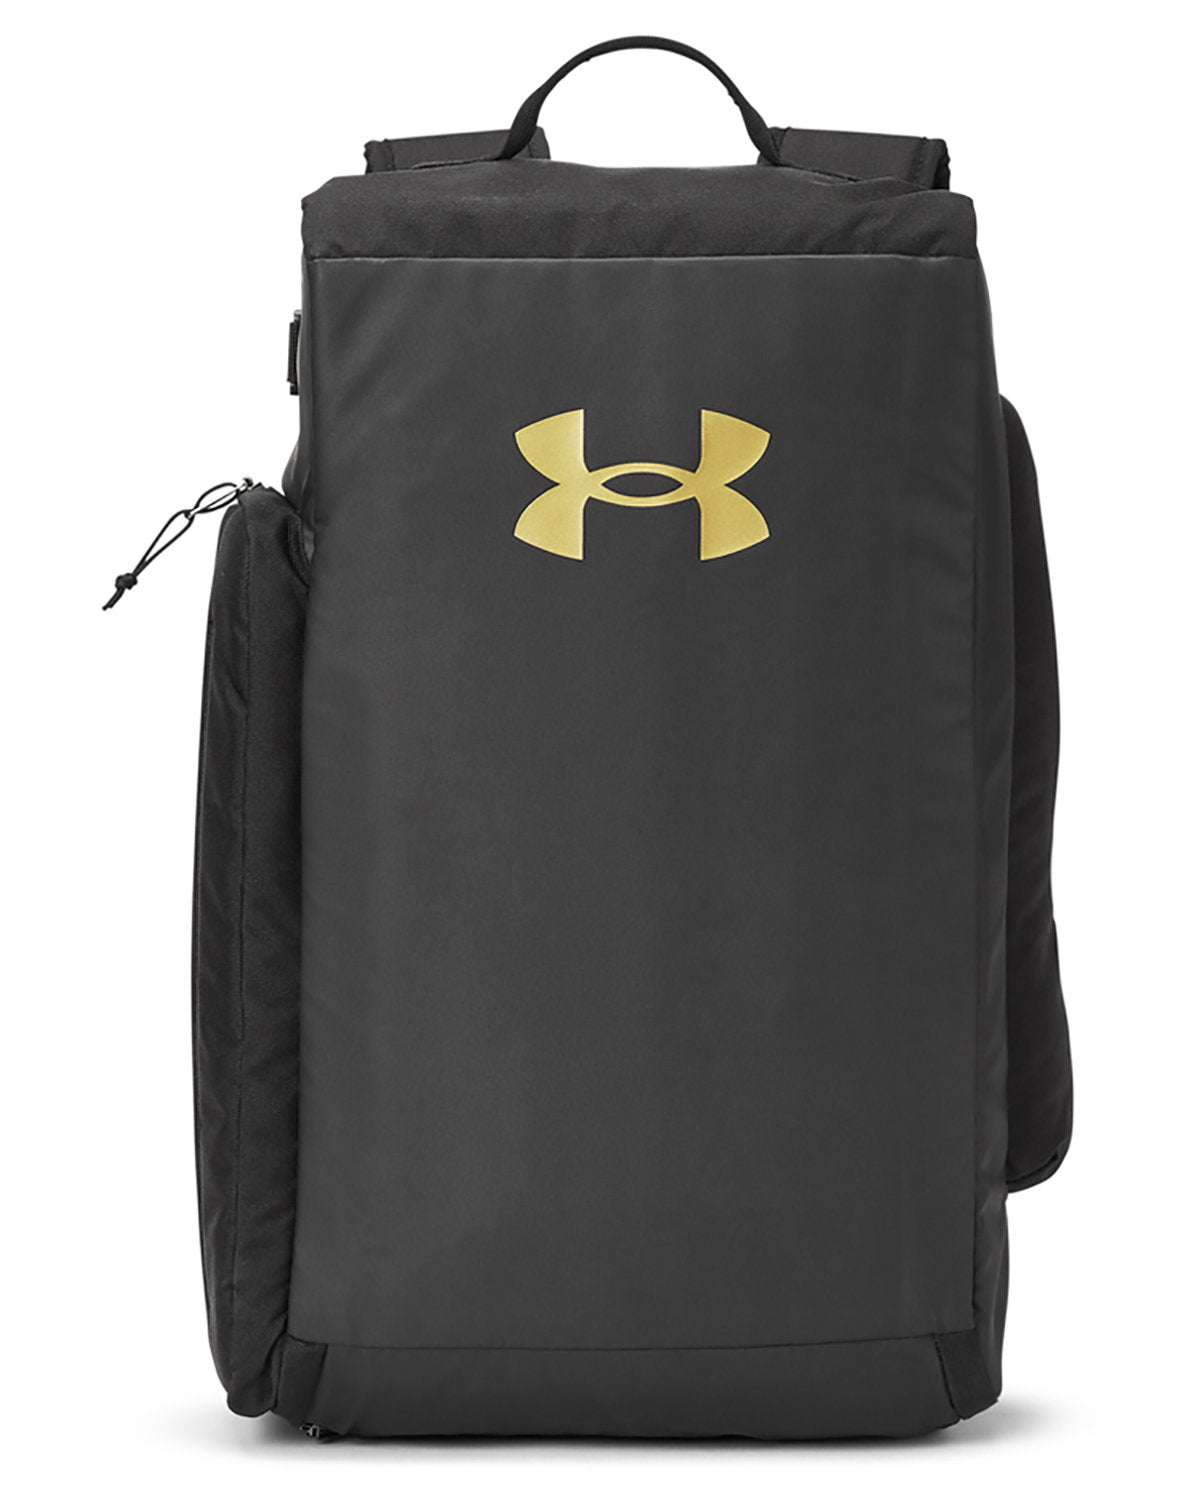 Under Armour Contain Small Convertible Duffel backpack